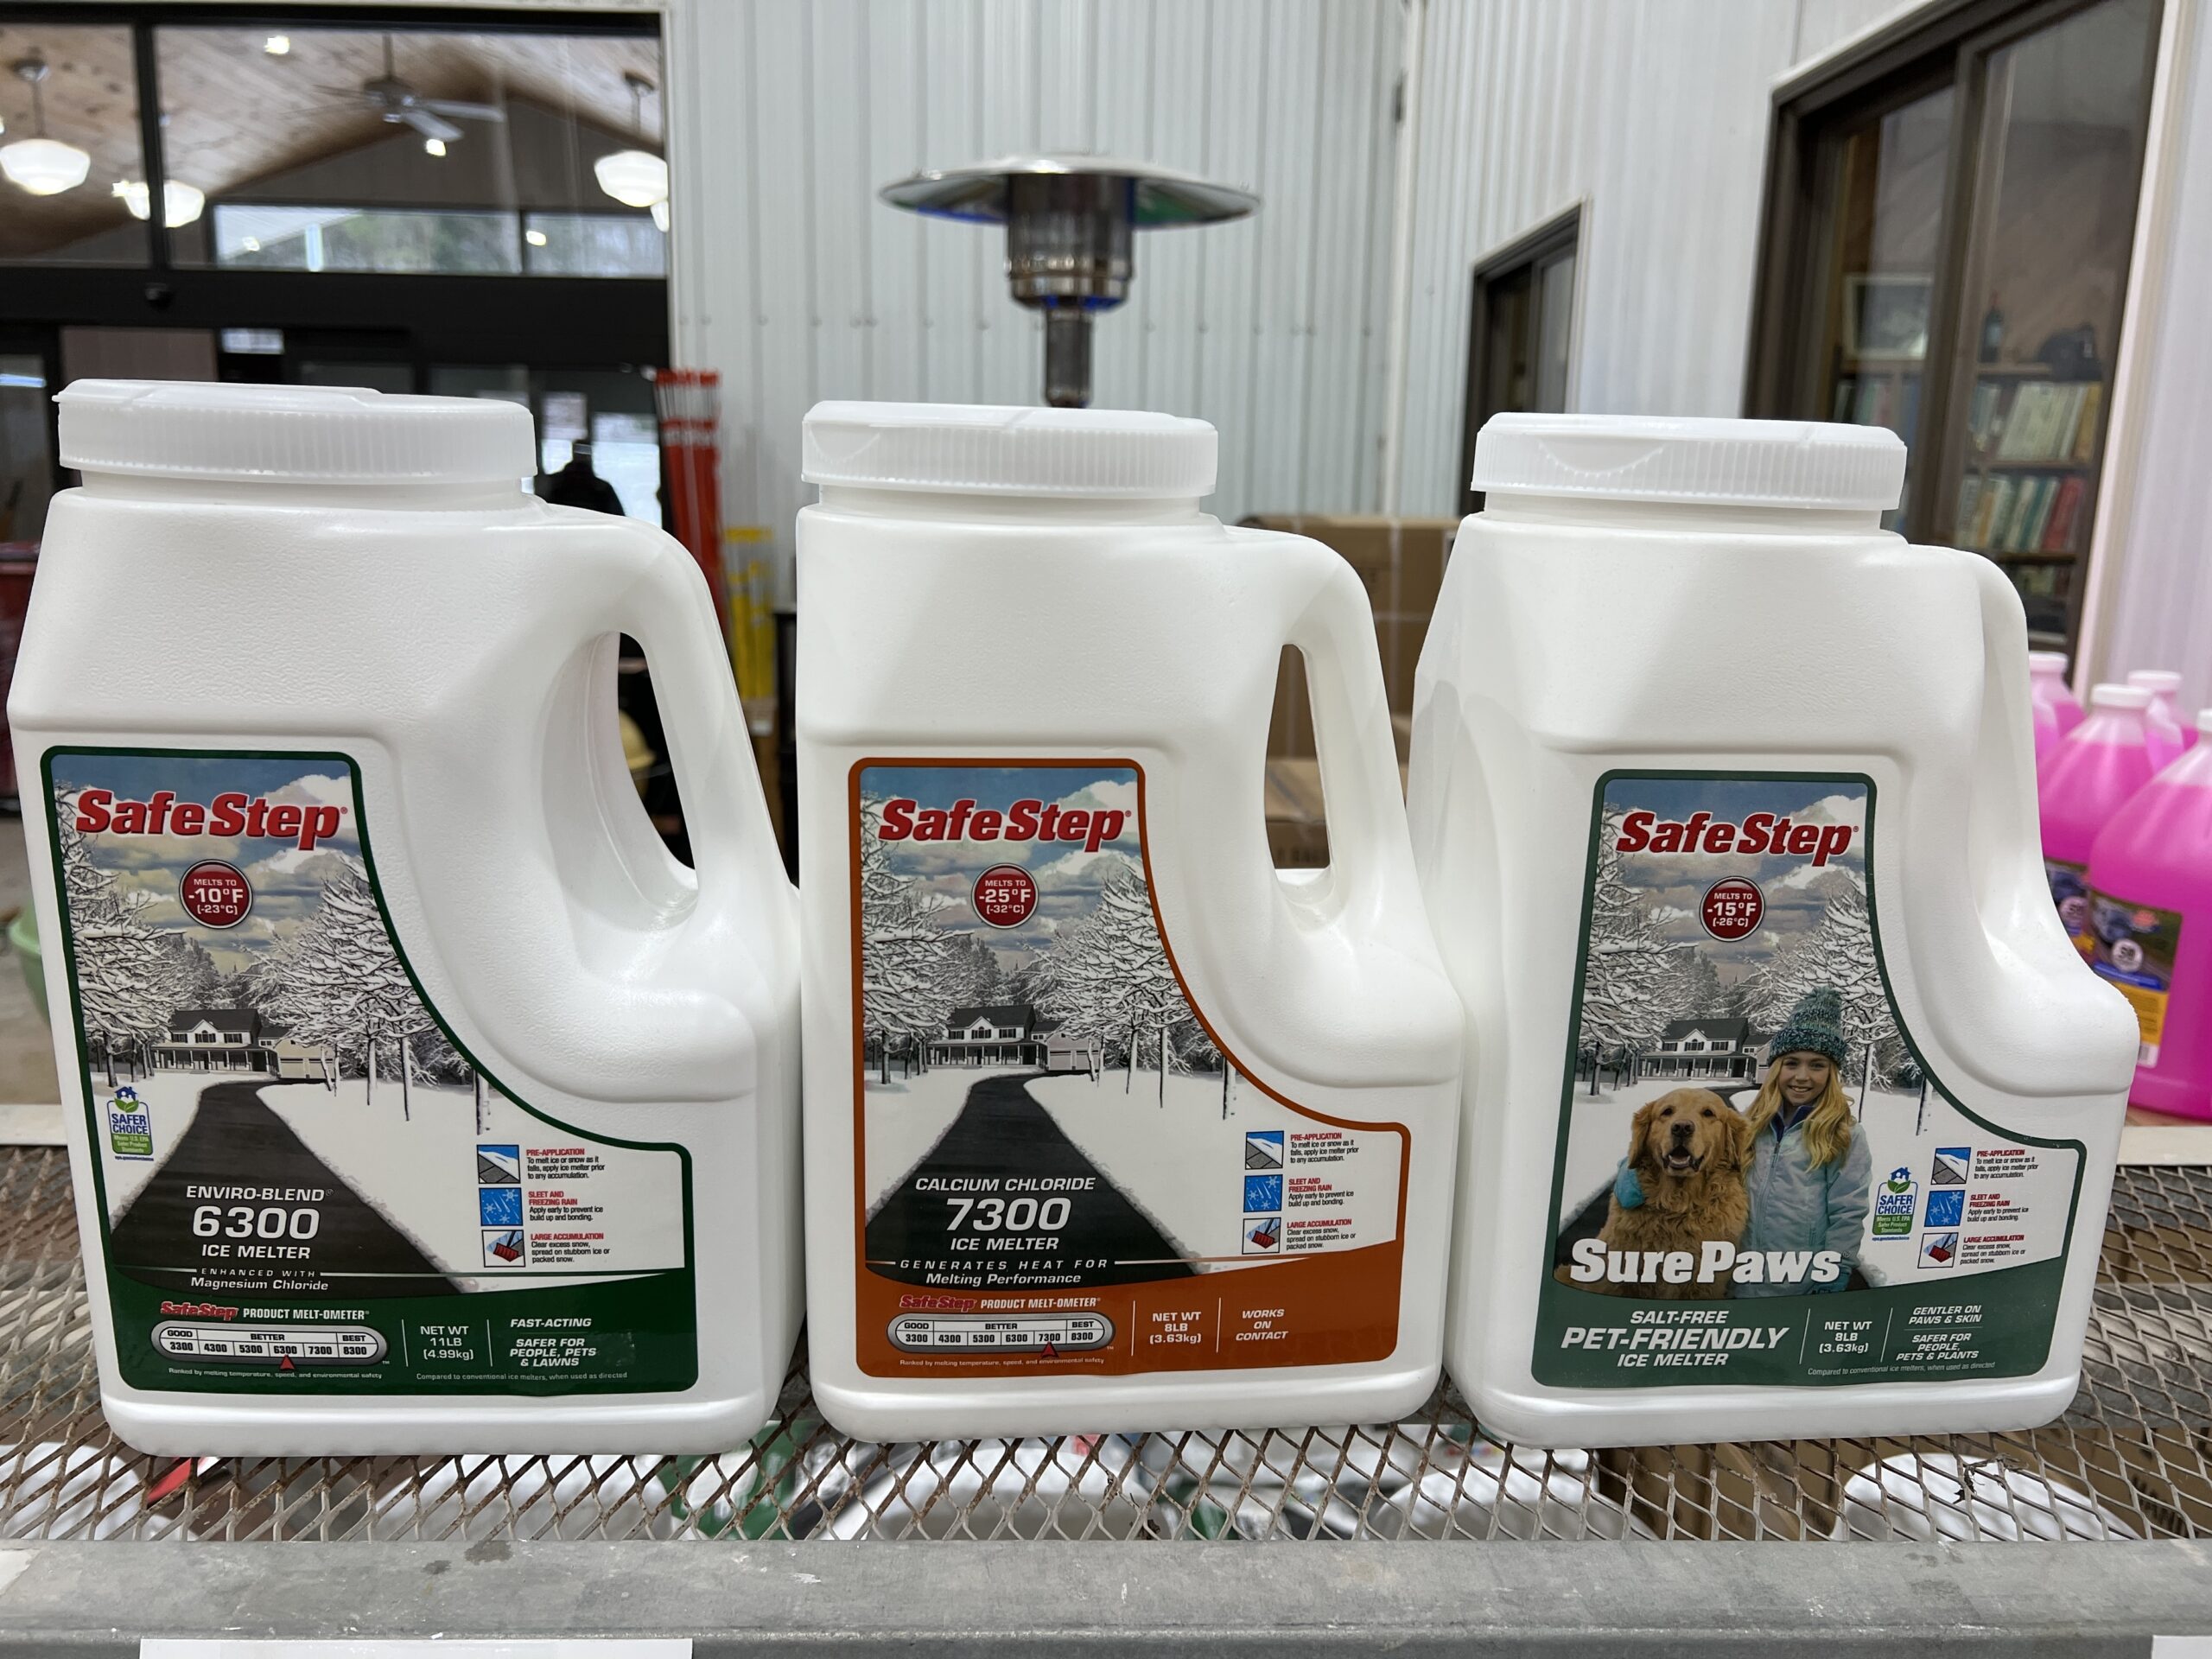 Jugs of ice melters are convenient, but their contents may be confusing. The SafeStep 6300 (left) and SurePaws (right) are both magnesium chloride. The difference?  The 6300 weighs 11 pounds while the SurePaws is only 8 pounds. Same exact stuff though. In the middle is the 7300, which is calcium chloride.
ANDREW MESSINGER